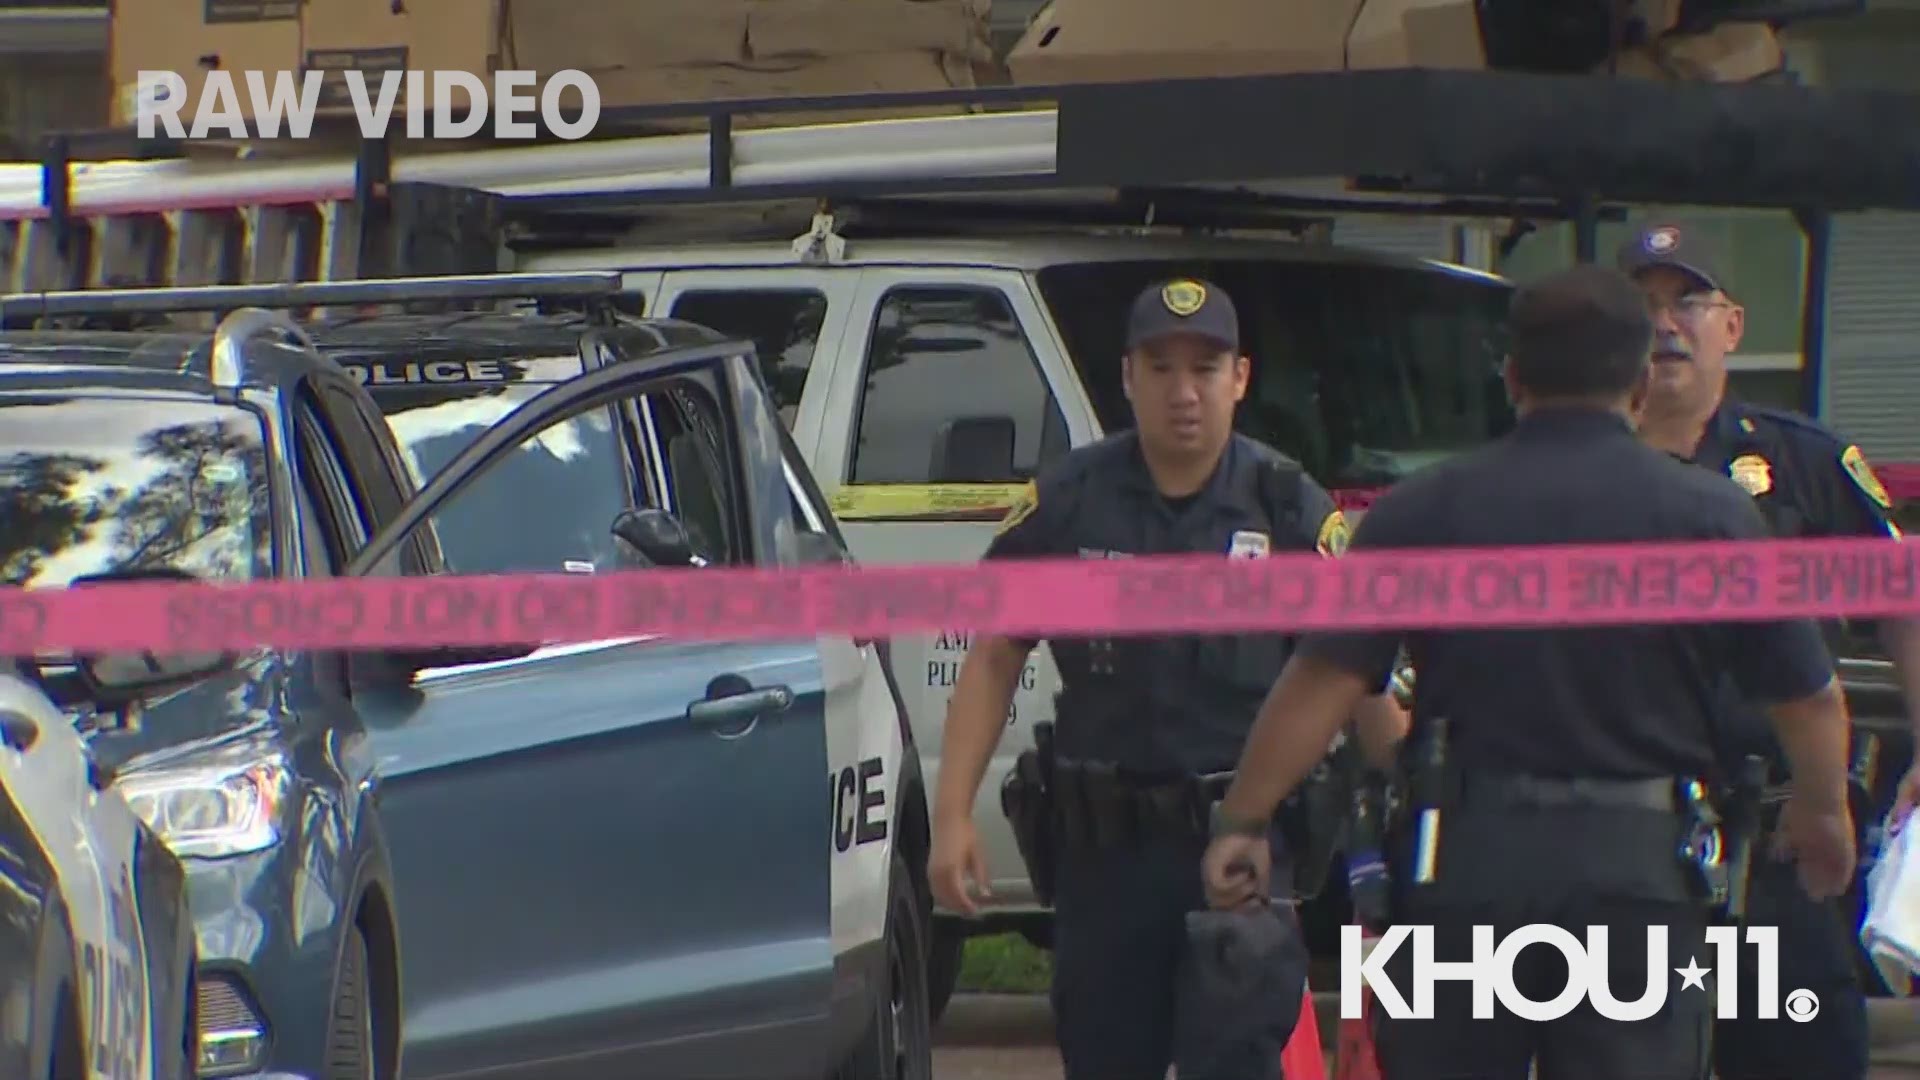 Two women were fatally shot early Saturday at a home in west Houston. HPD confirmed they have a suspect in custody.